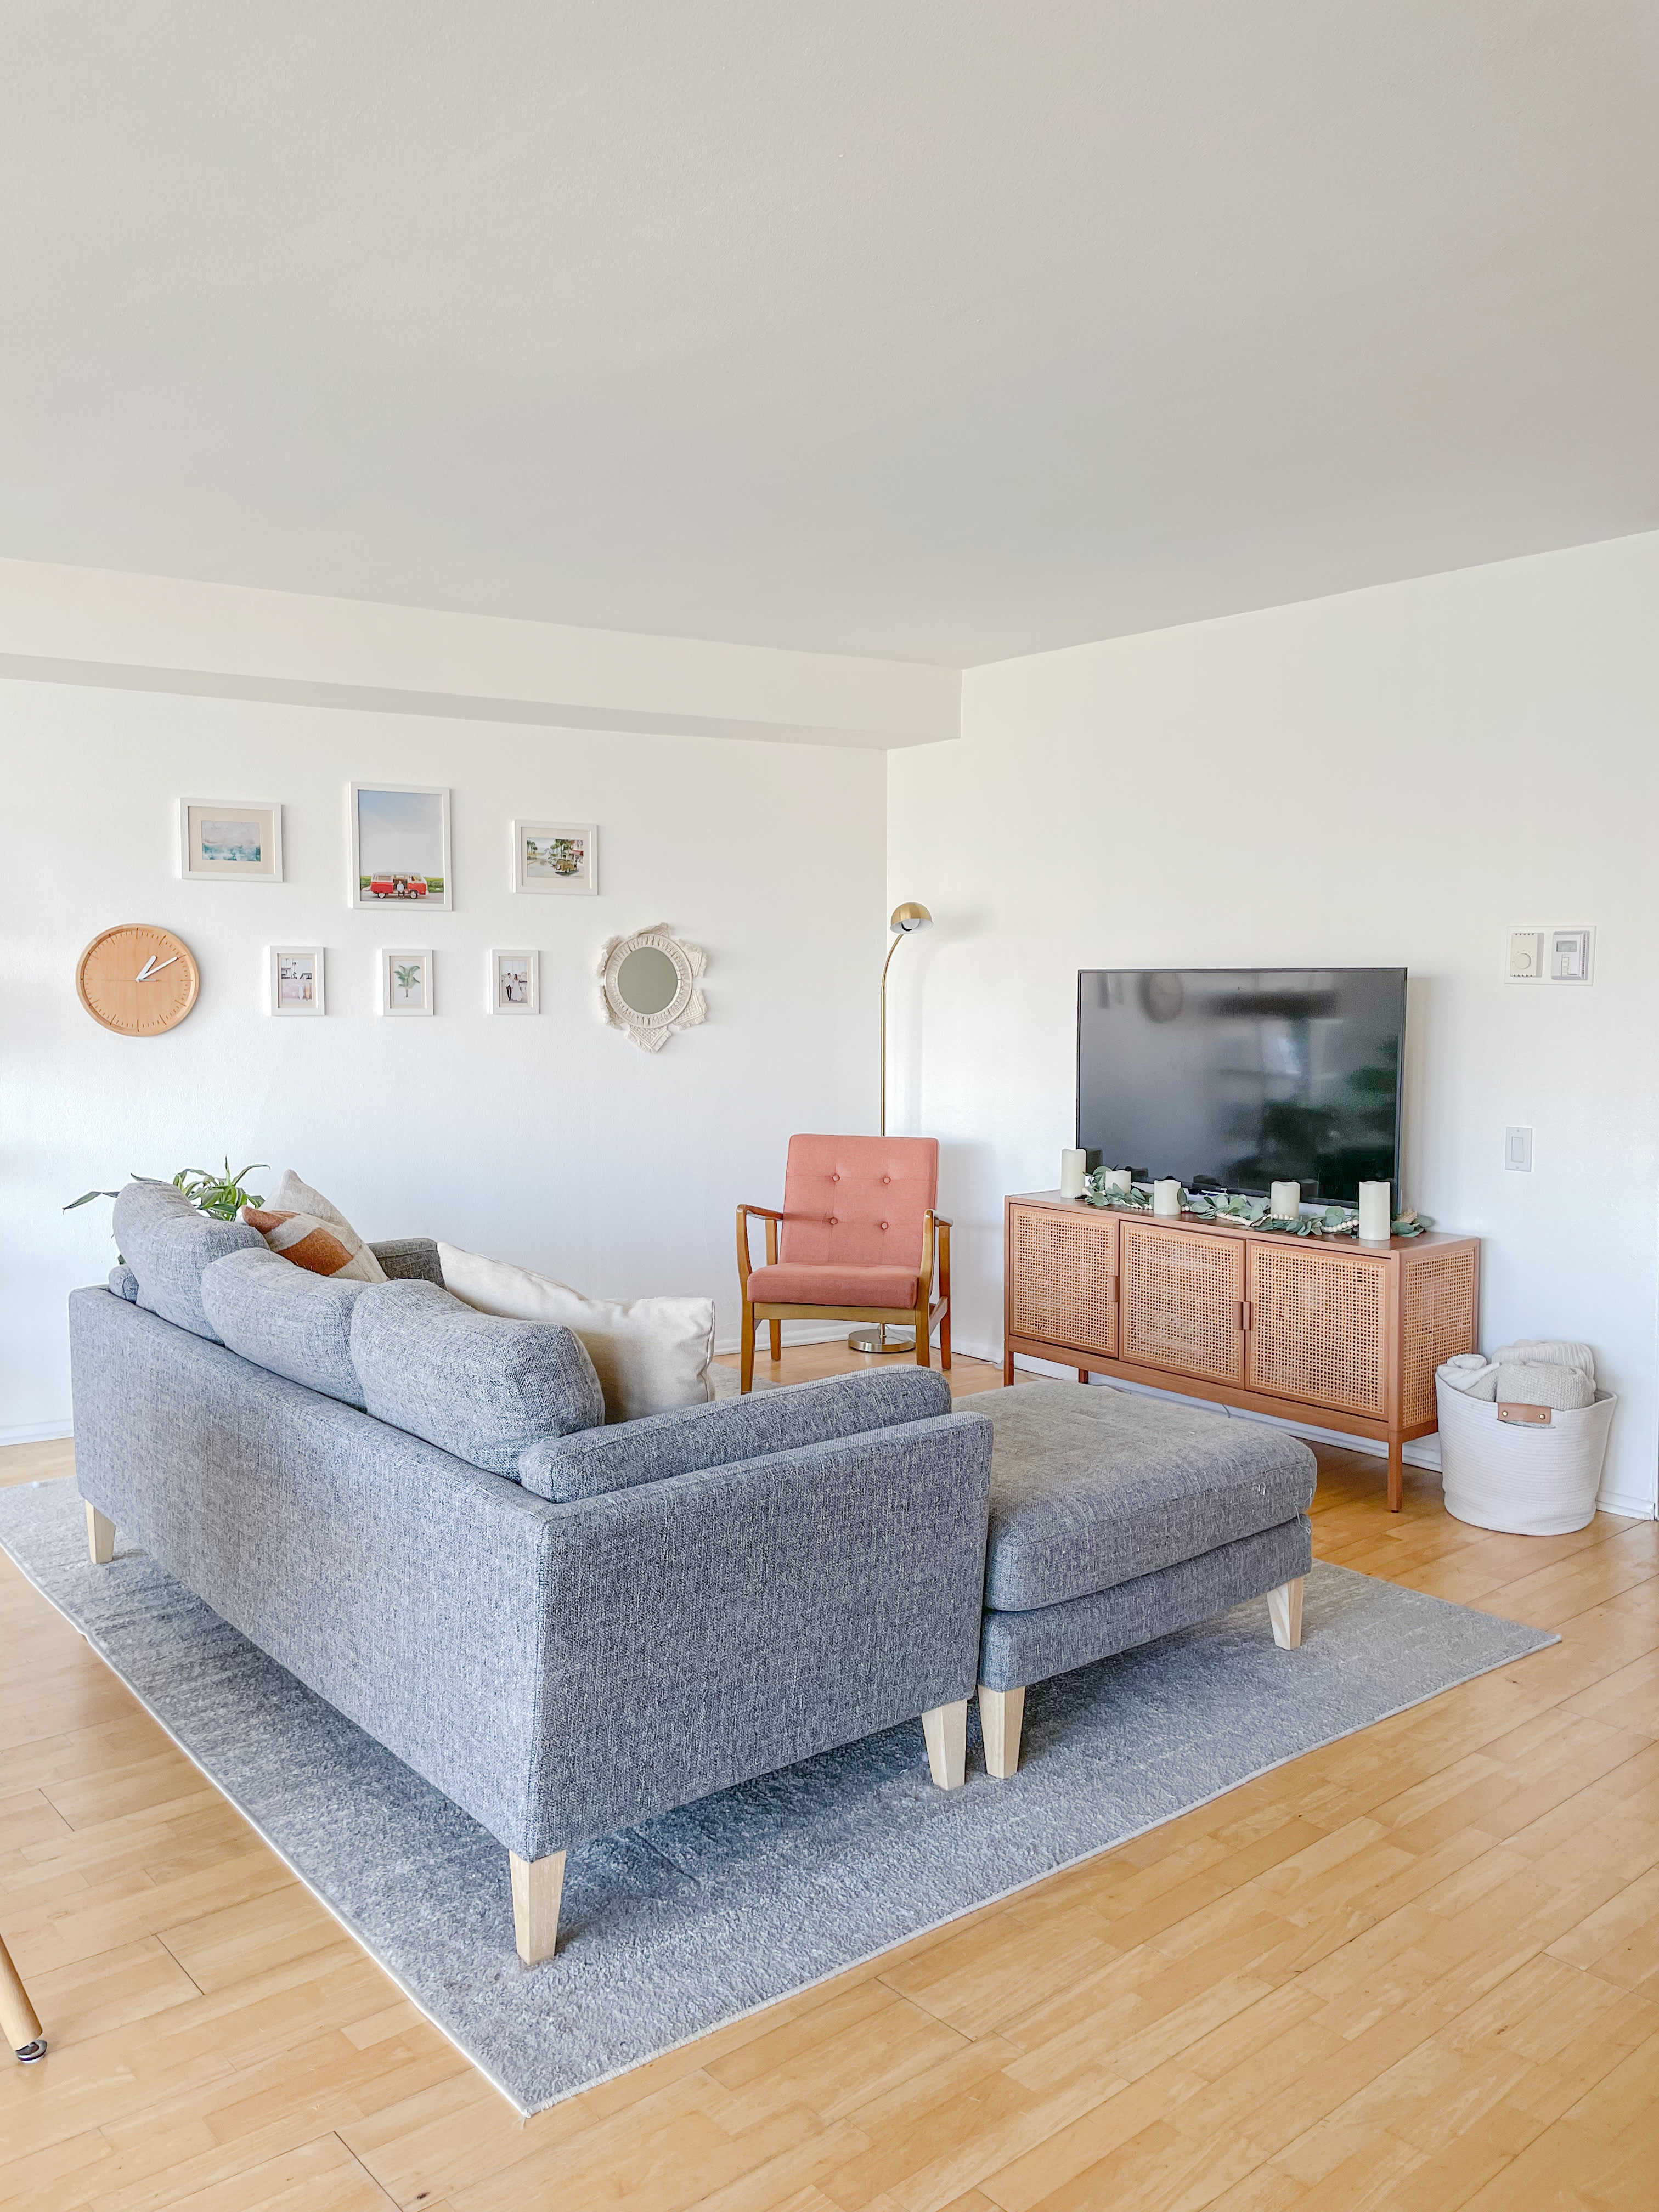 Here's You Might Consider Floating Furniture, Even in a Small Space | Apartment Therapy